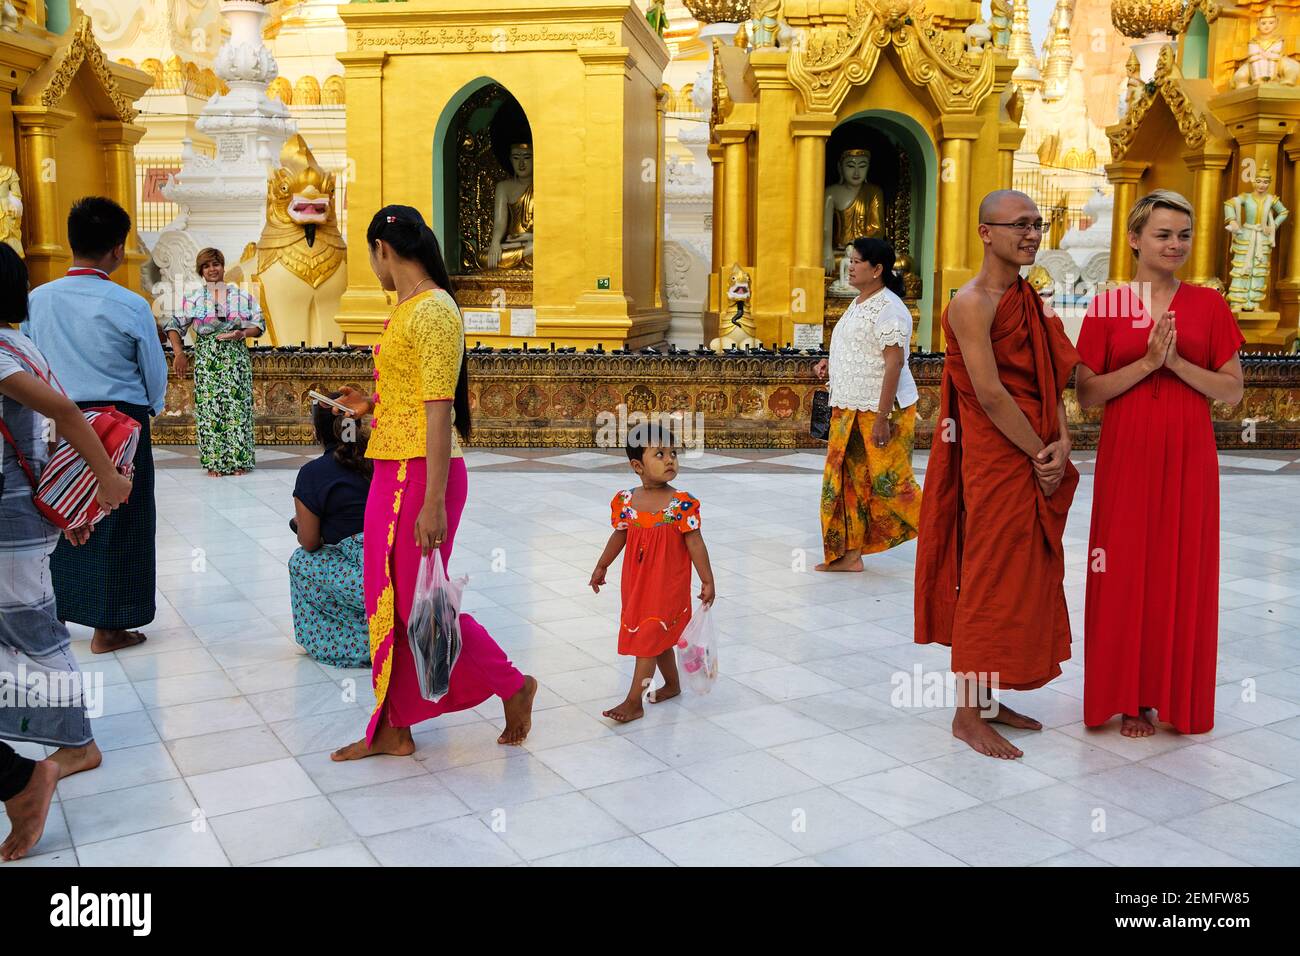 Visitors and tourists at Shwedagon Pagoda temple complex in Yangon, Myanmar. Stock Photo